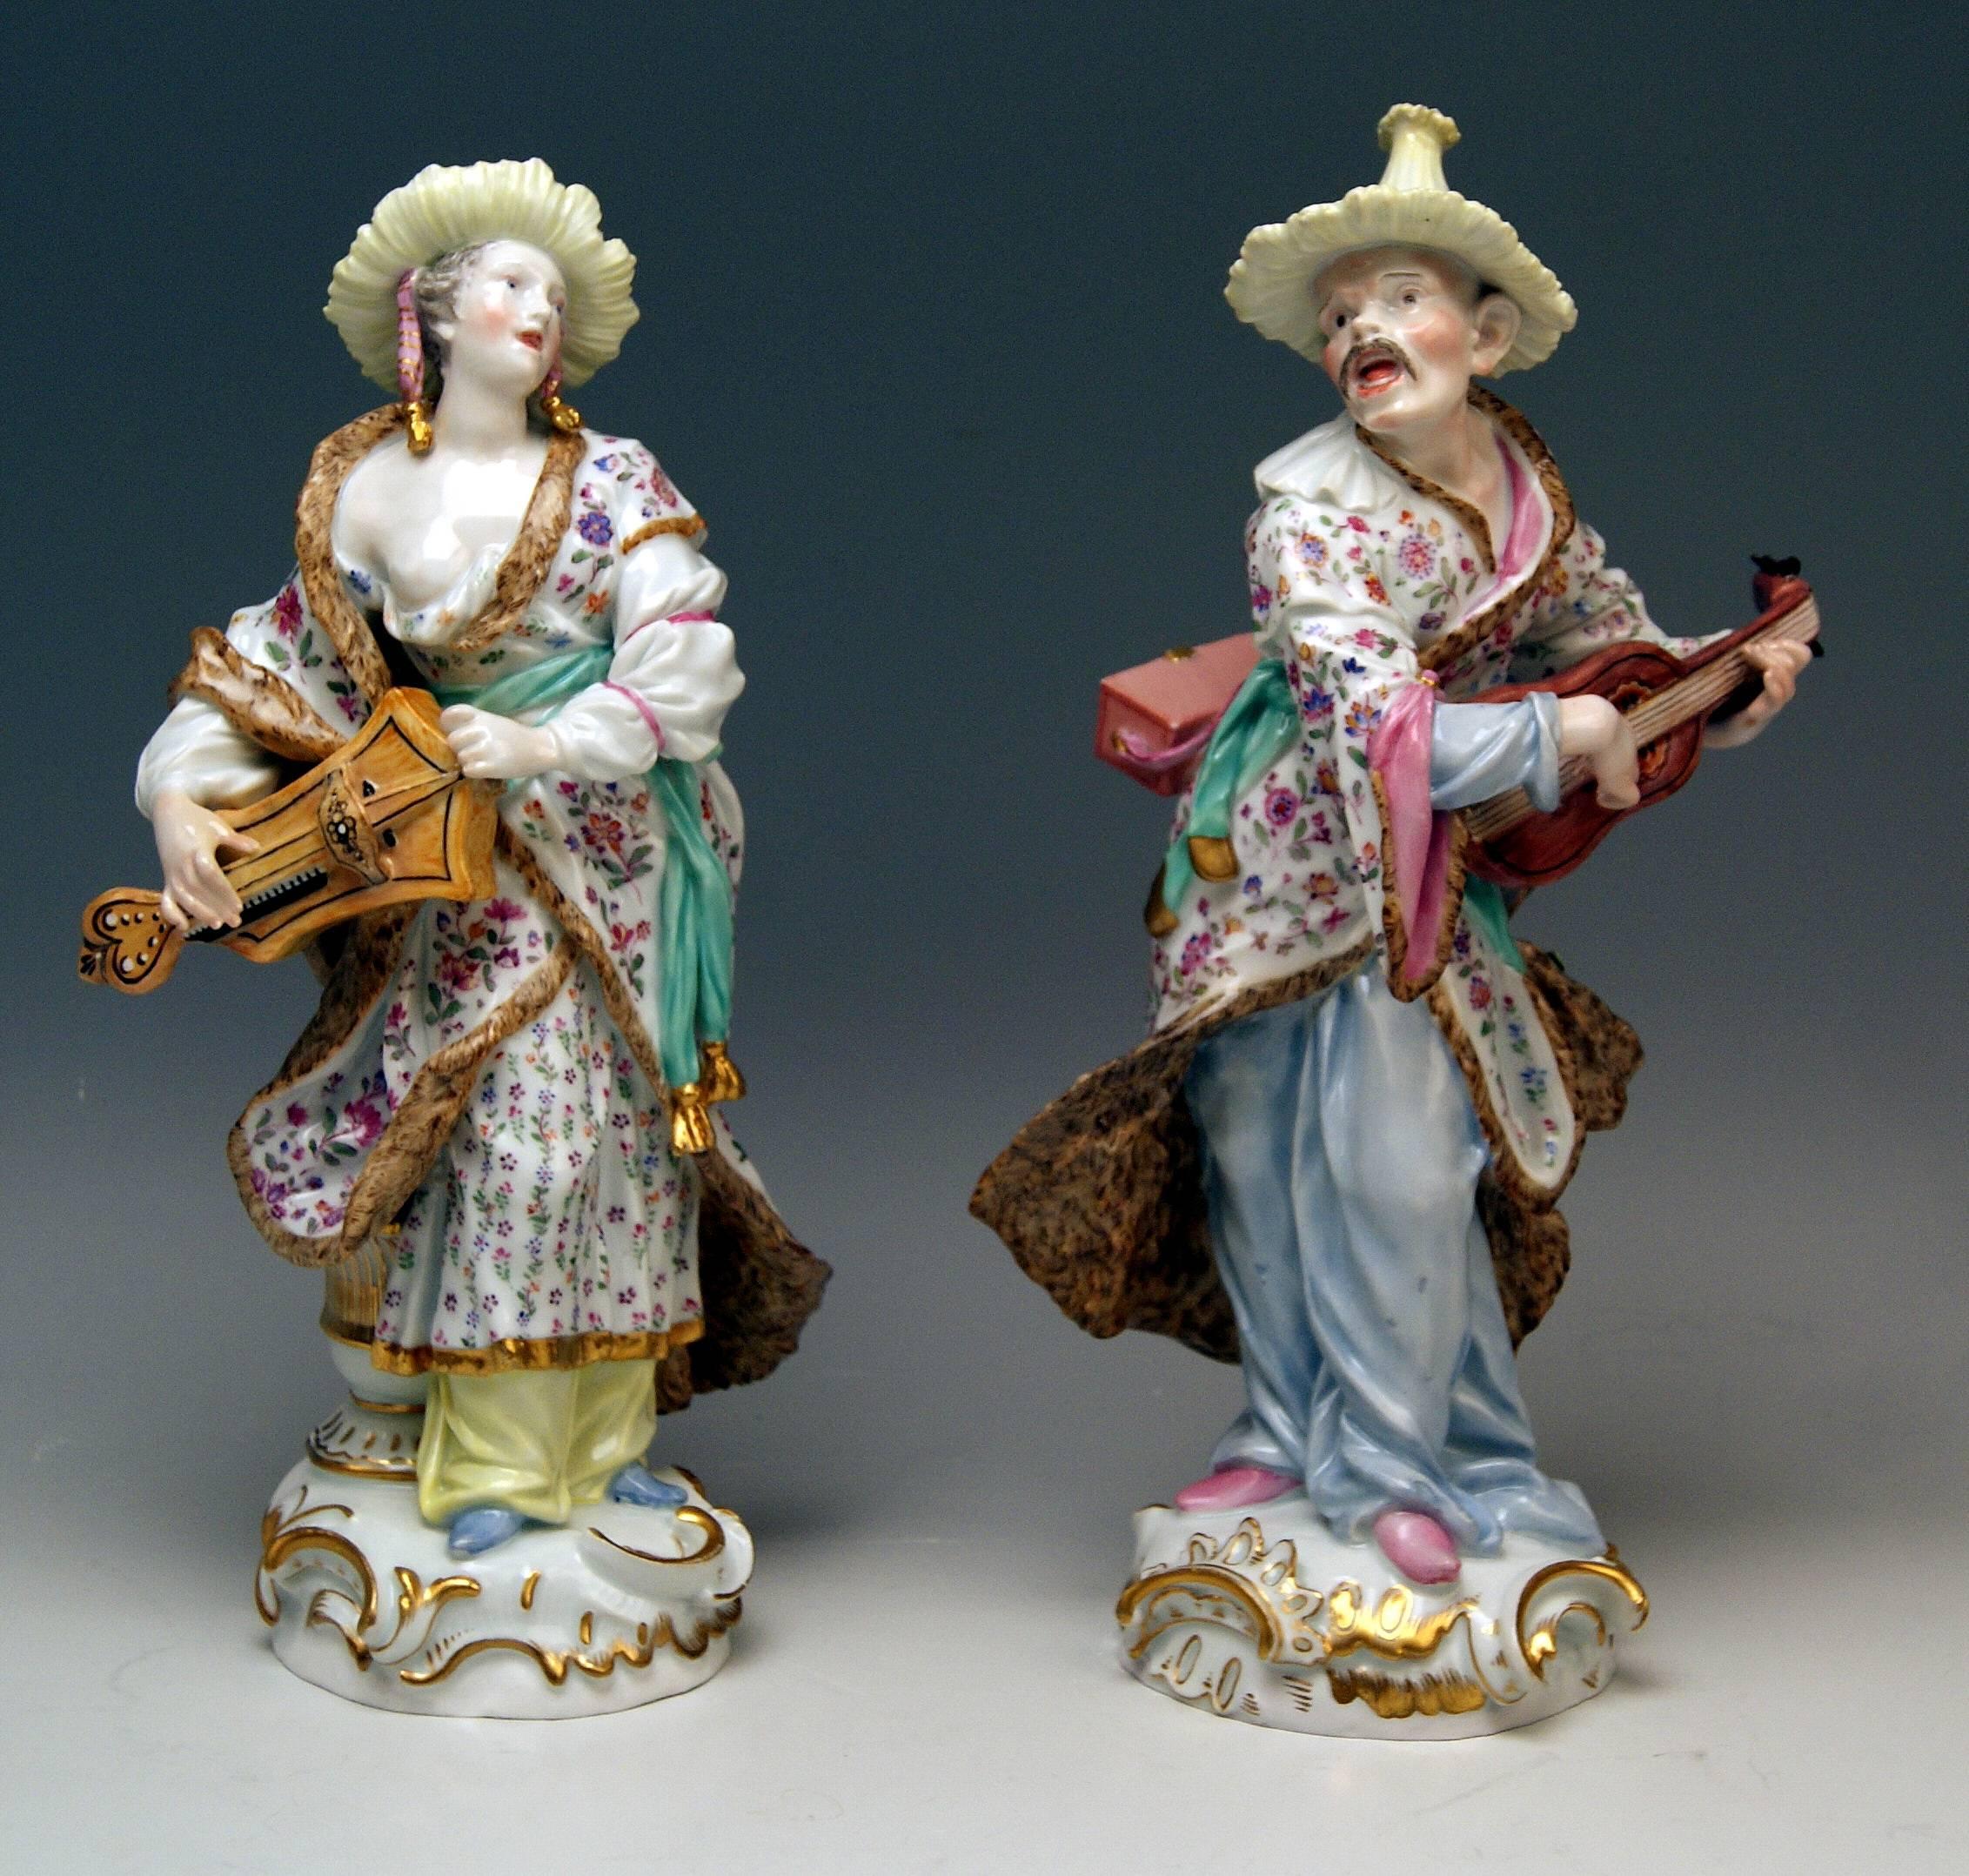 Meissen gorgeous pair of figurines: Malabarian lady and Malbarian man
The details are stunningly sculptured = finest modelling.

Design:
Friedrich Elias Meyer (1751)
F. E. Meyer has been engaged since year 1748 at Meissen manufactory. He moved